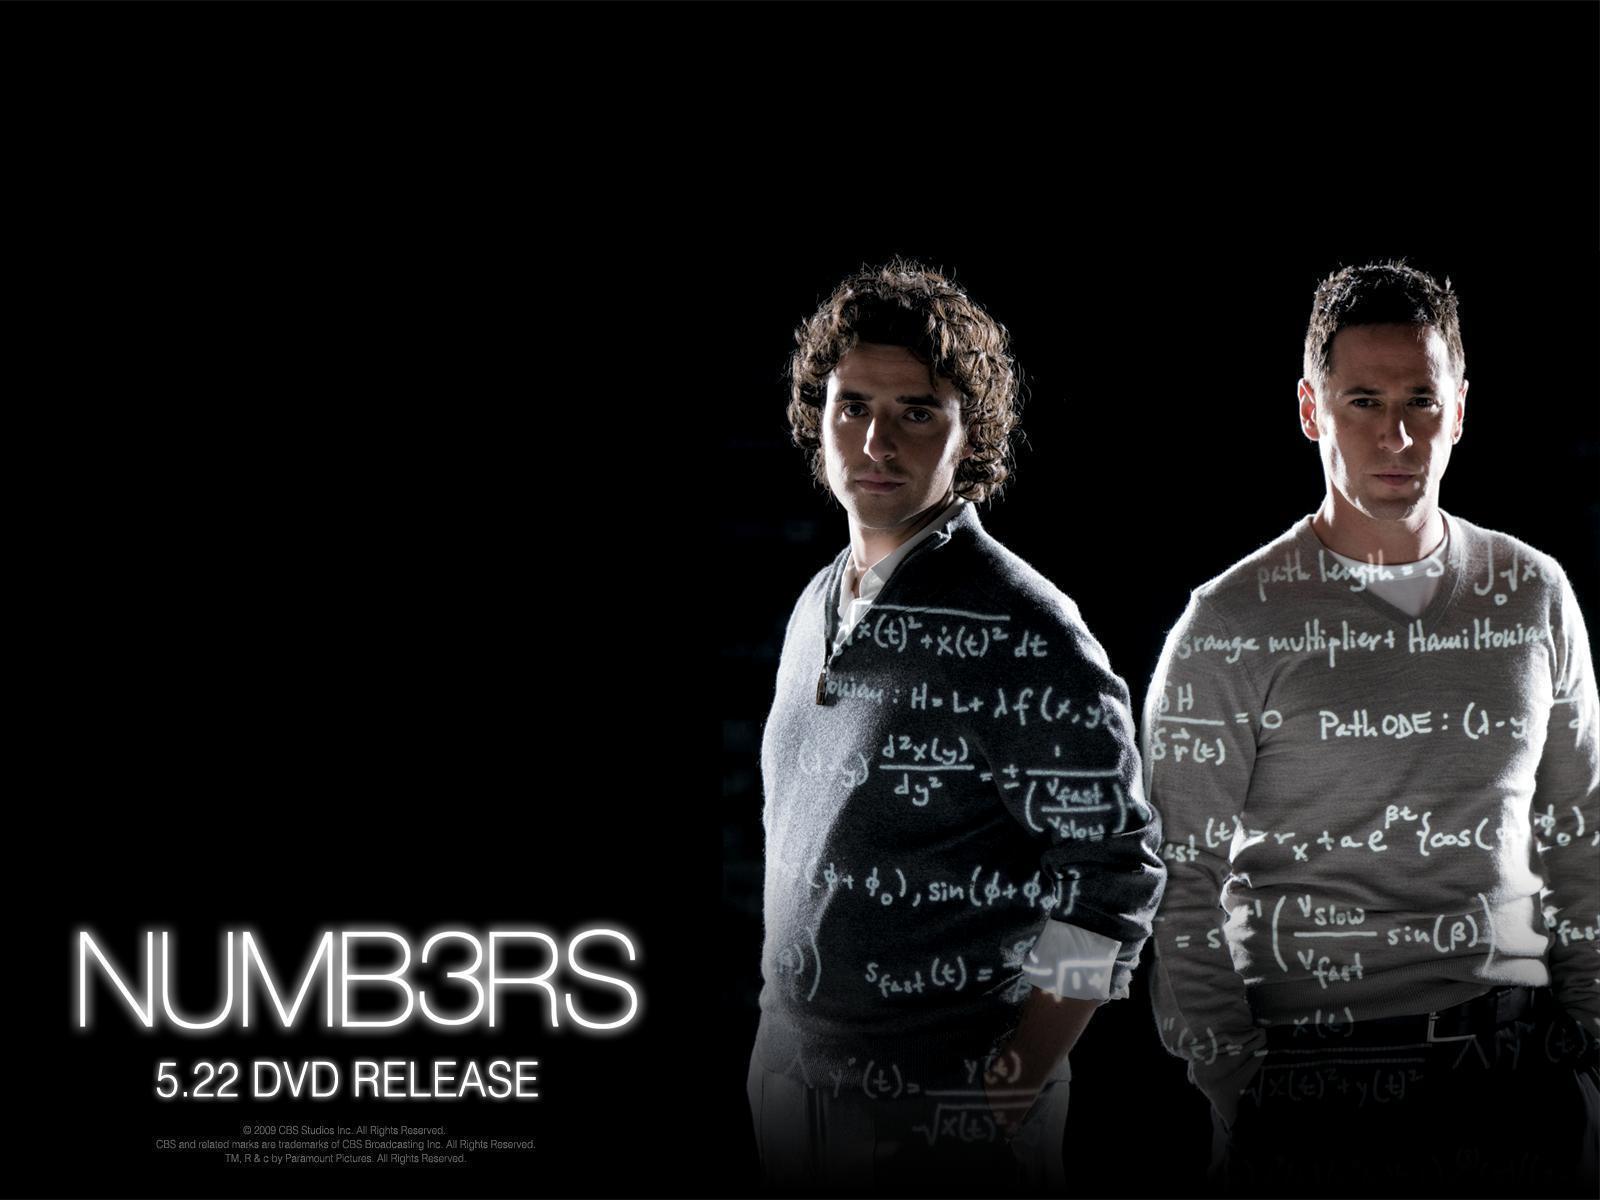 Numb3rs Wallpapers.